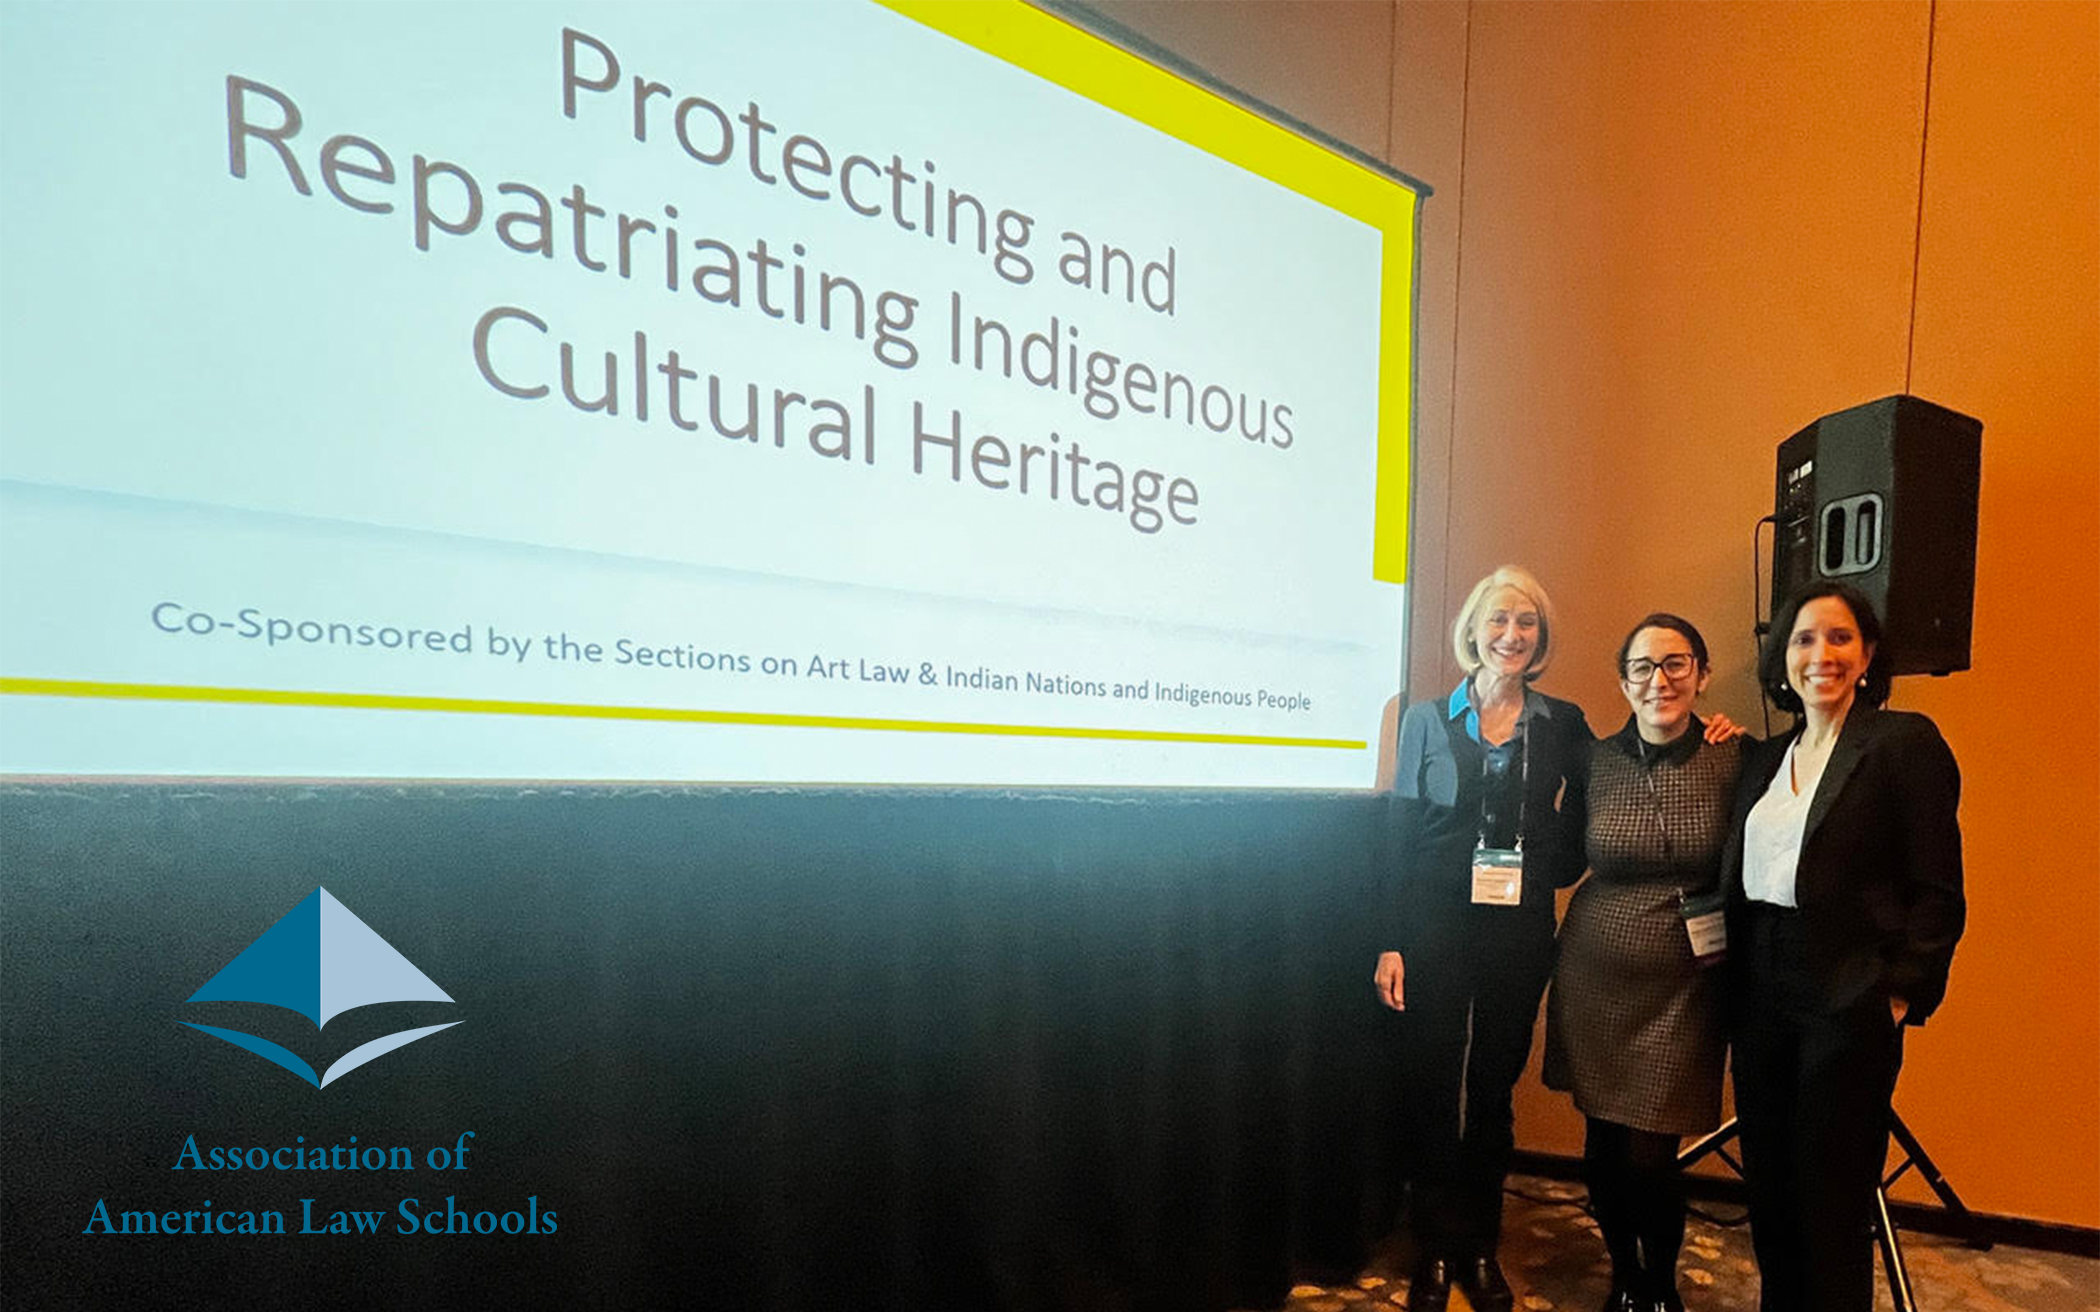 Professor Bronin stands with two others in front of a screen which reads "Protecting and Repatriating Indigenous Cultural Heritage."